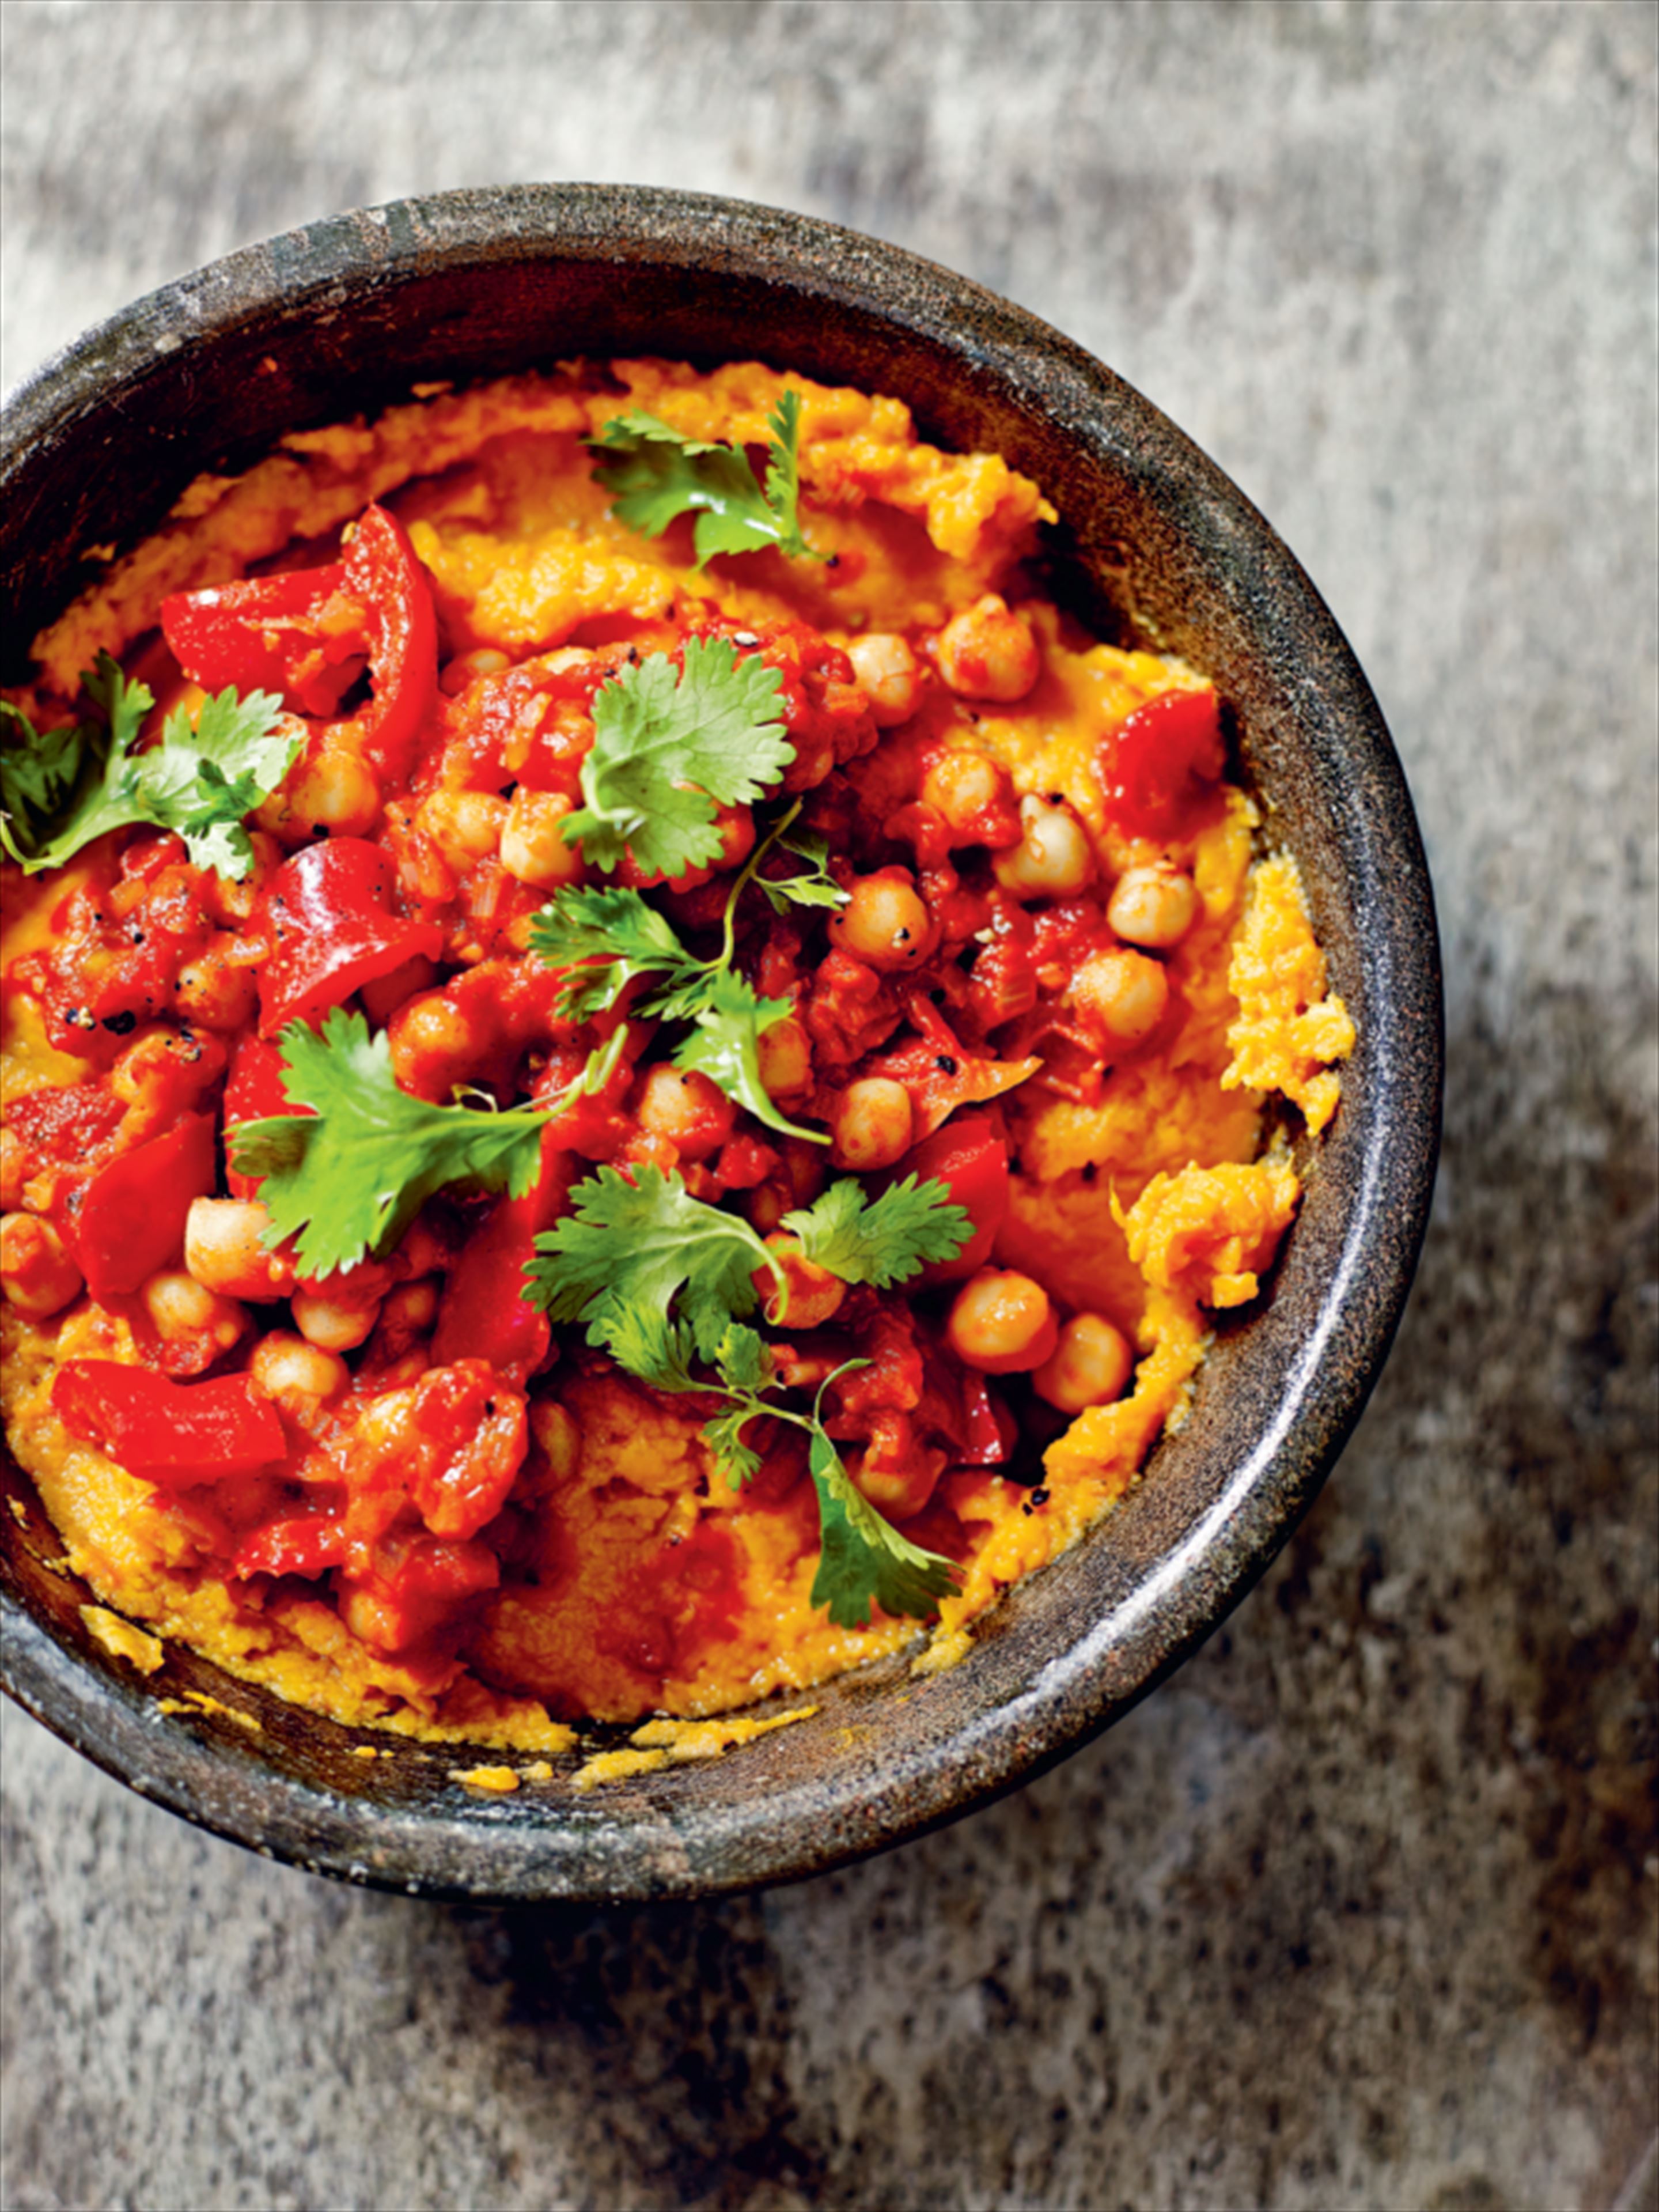 Chickpea and red pepper stew with sweet potato mash